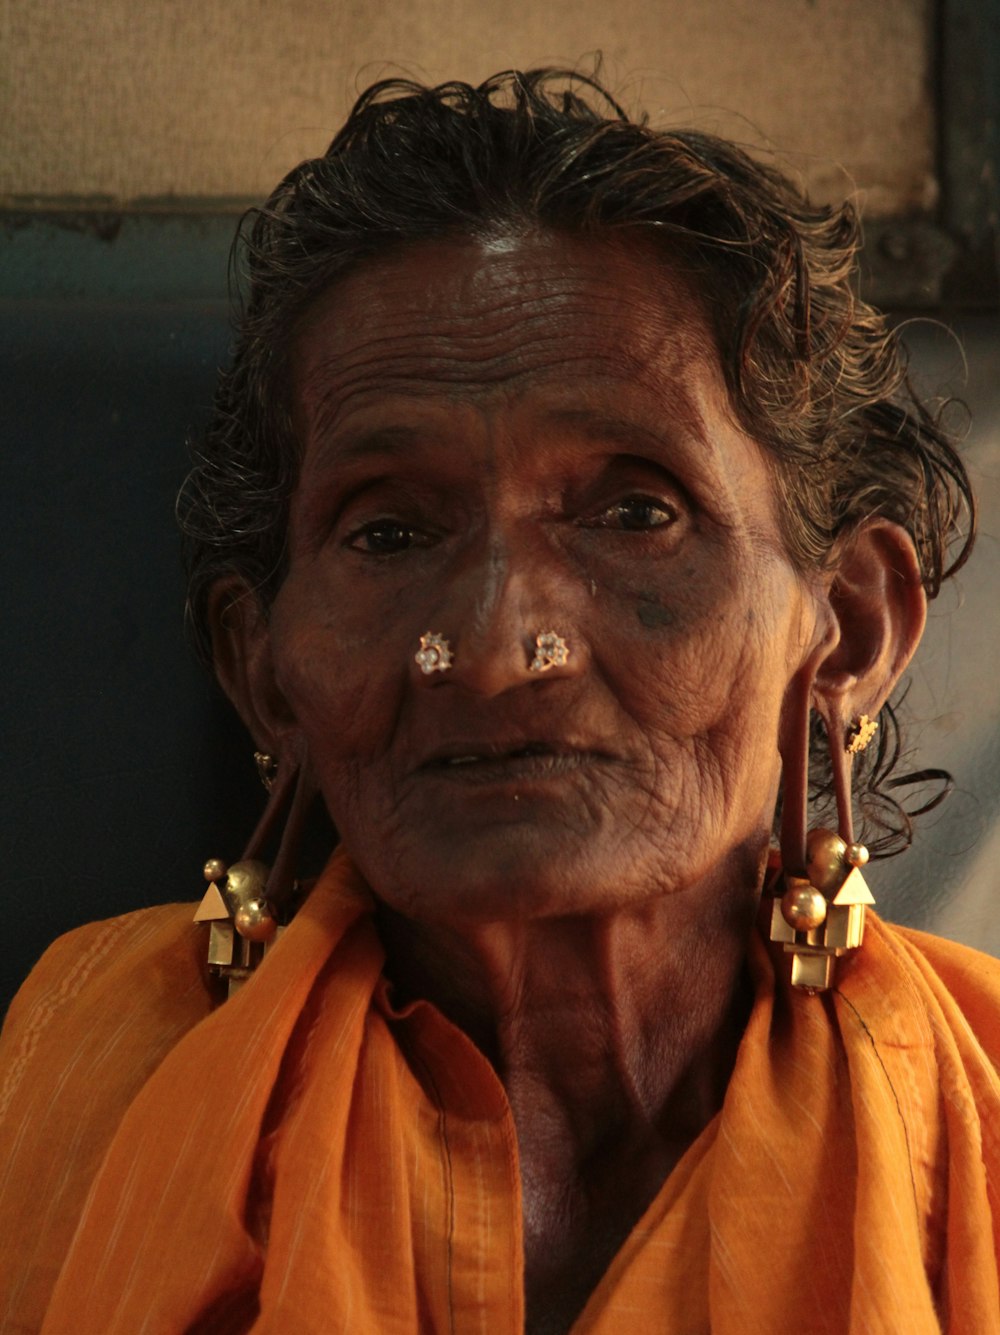 an old woman with piercings on her nose